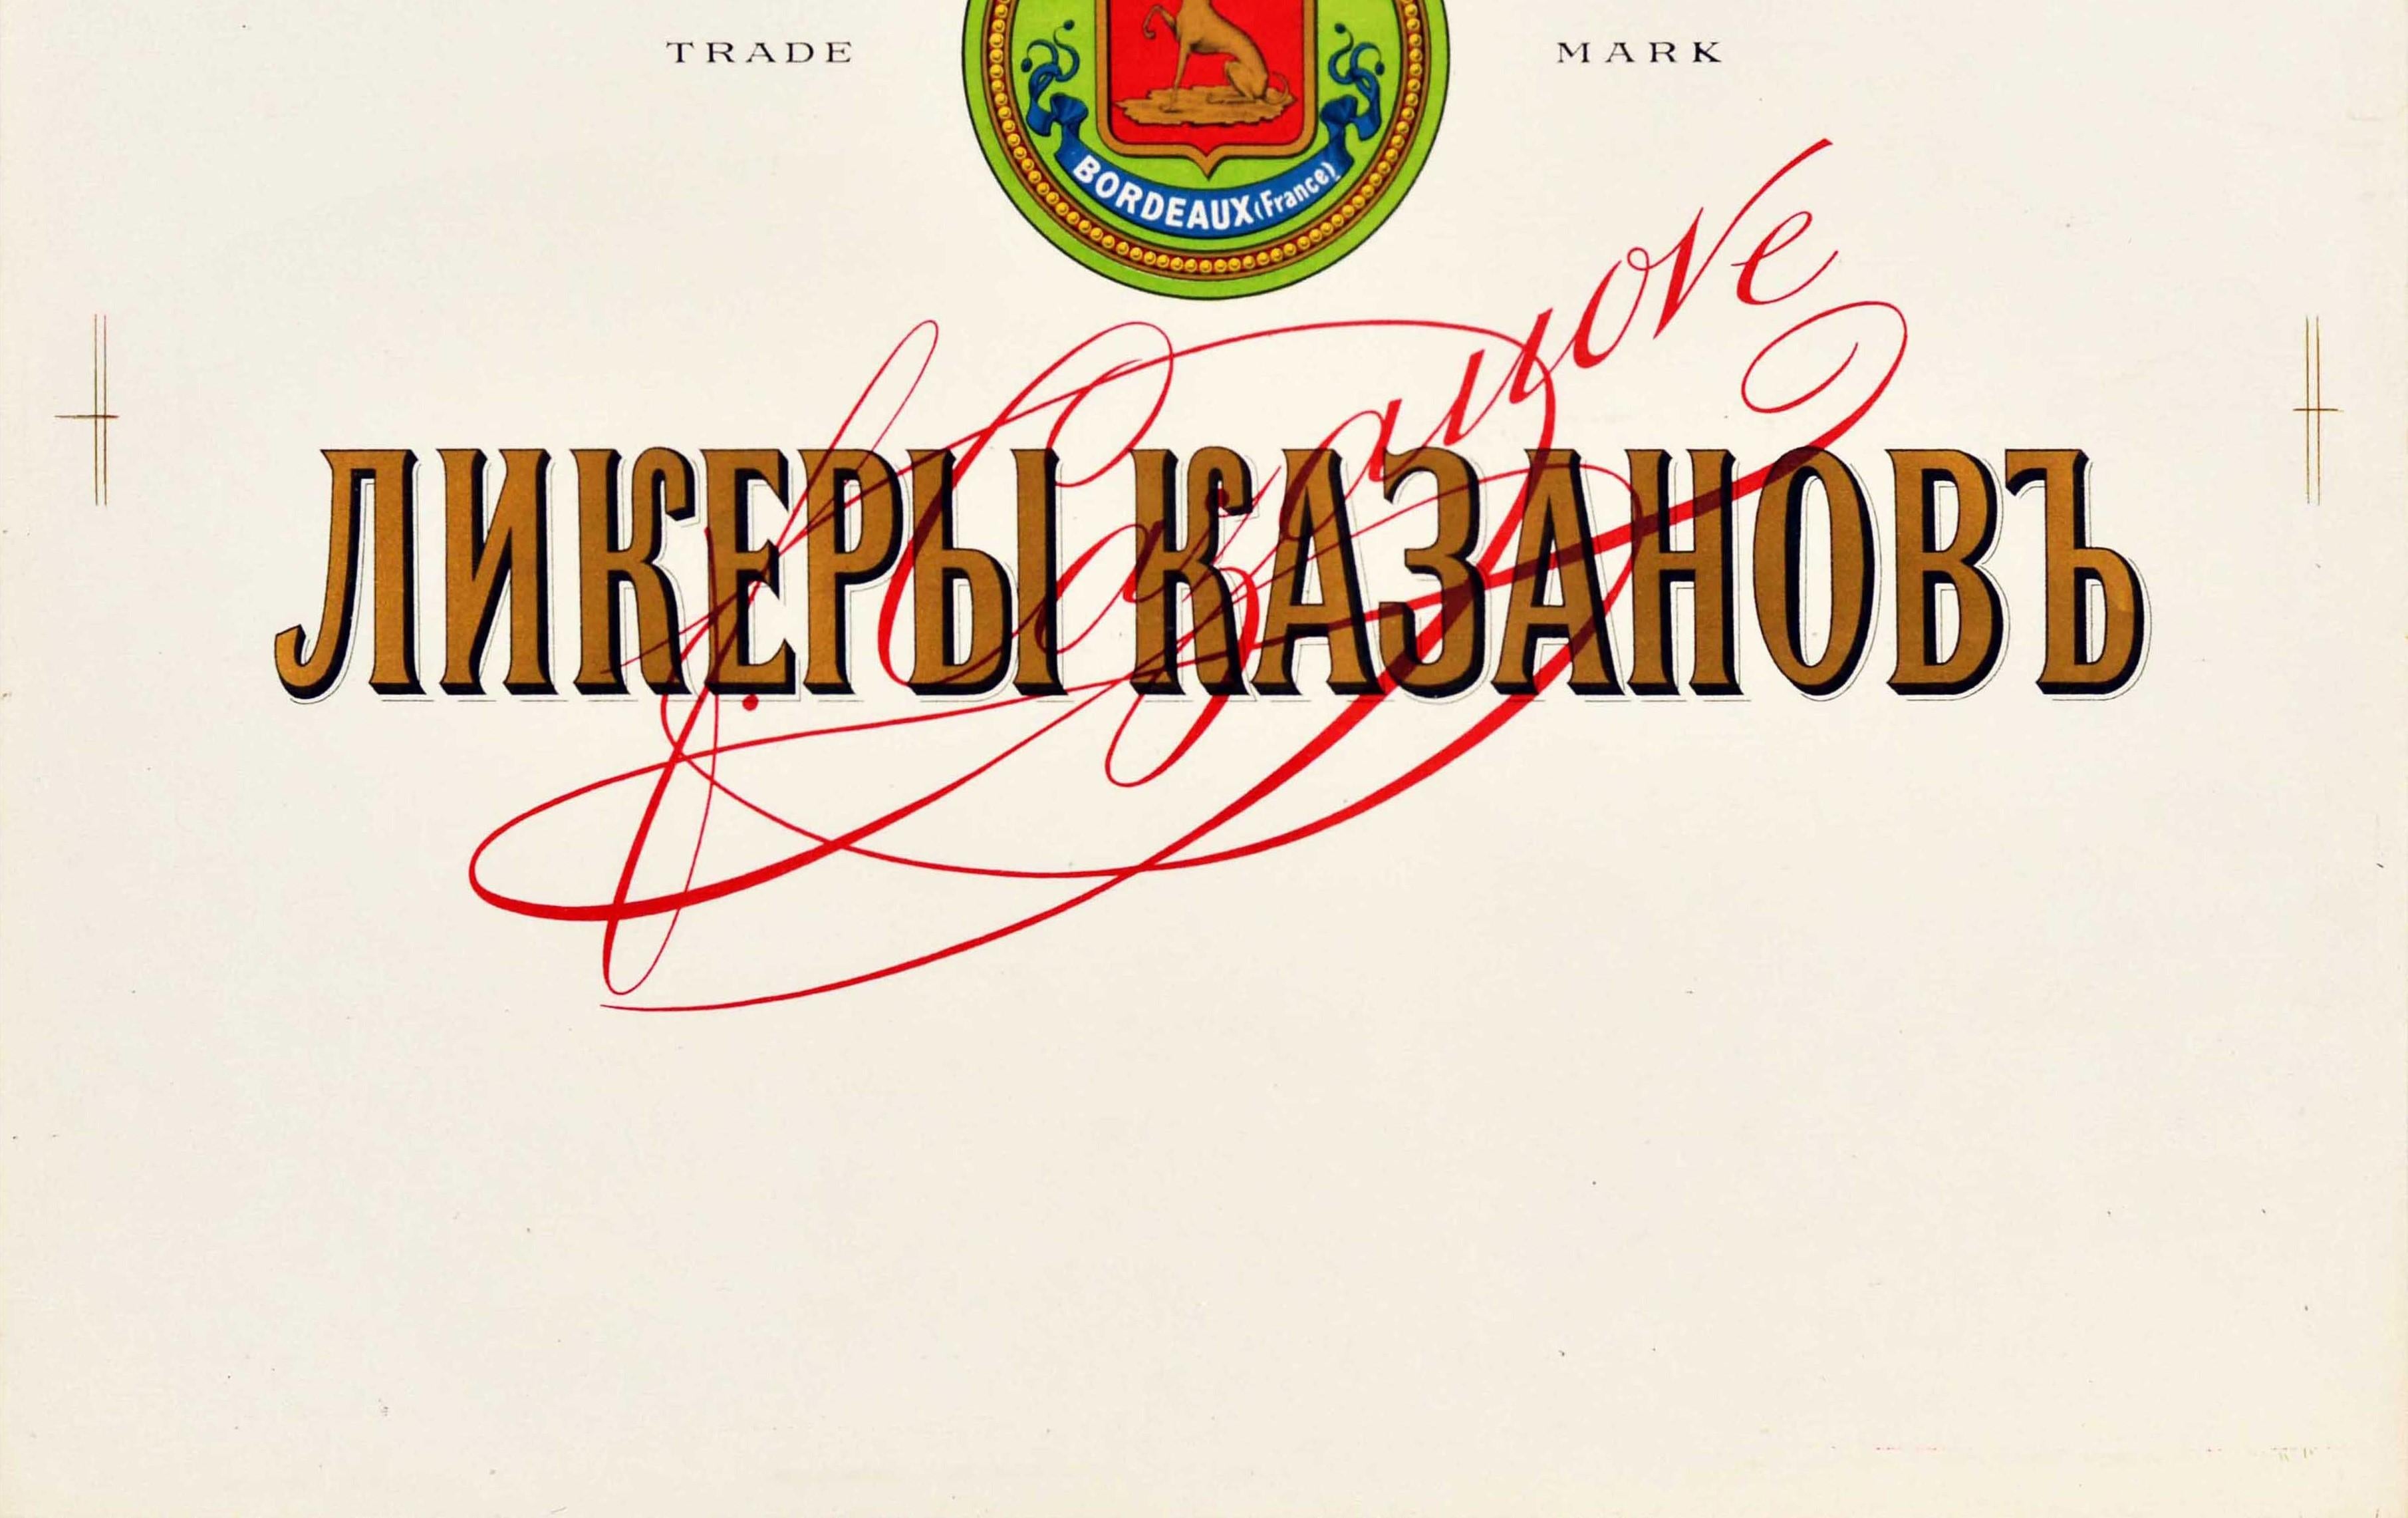 Original antique drink advertising poster for Liqueur Kazanove Ликеры Казановъ Bordeaux France Trade Mark featuring the title text in bold lettering in the centre with the Francois Cazanove distillery signature in red and coat of arms above.